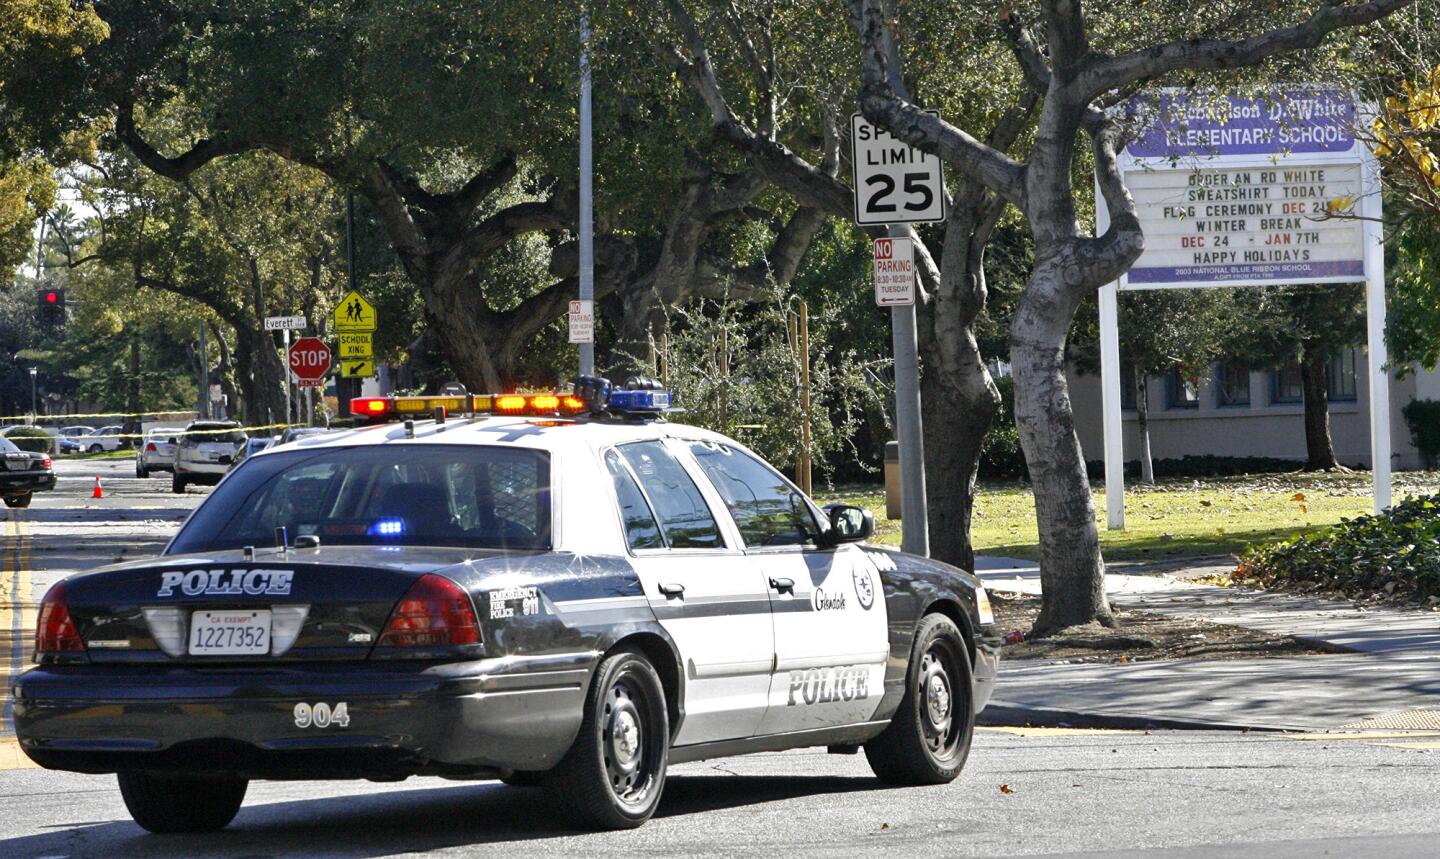 Glendale police cars block the street in front of R.D White Elementary School after the school was evacuated due to a bomb threat on Monday, January 7, 2013.